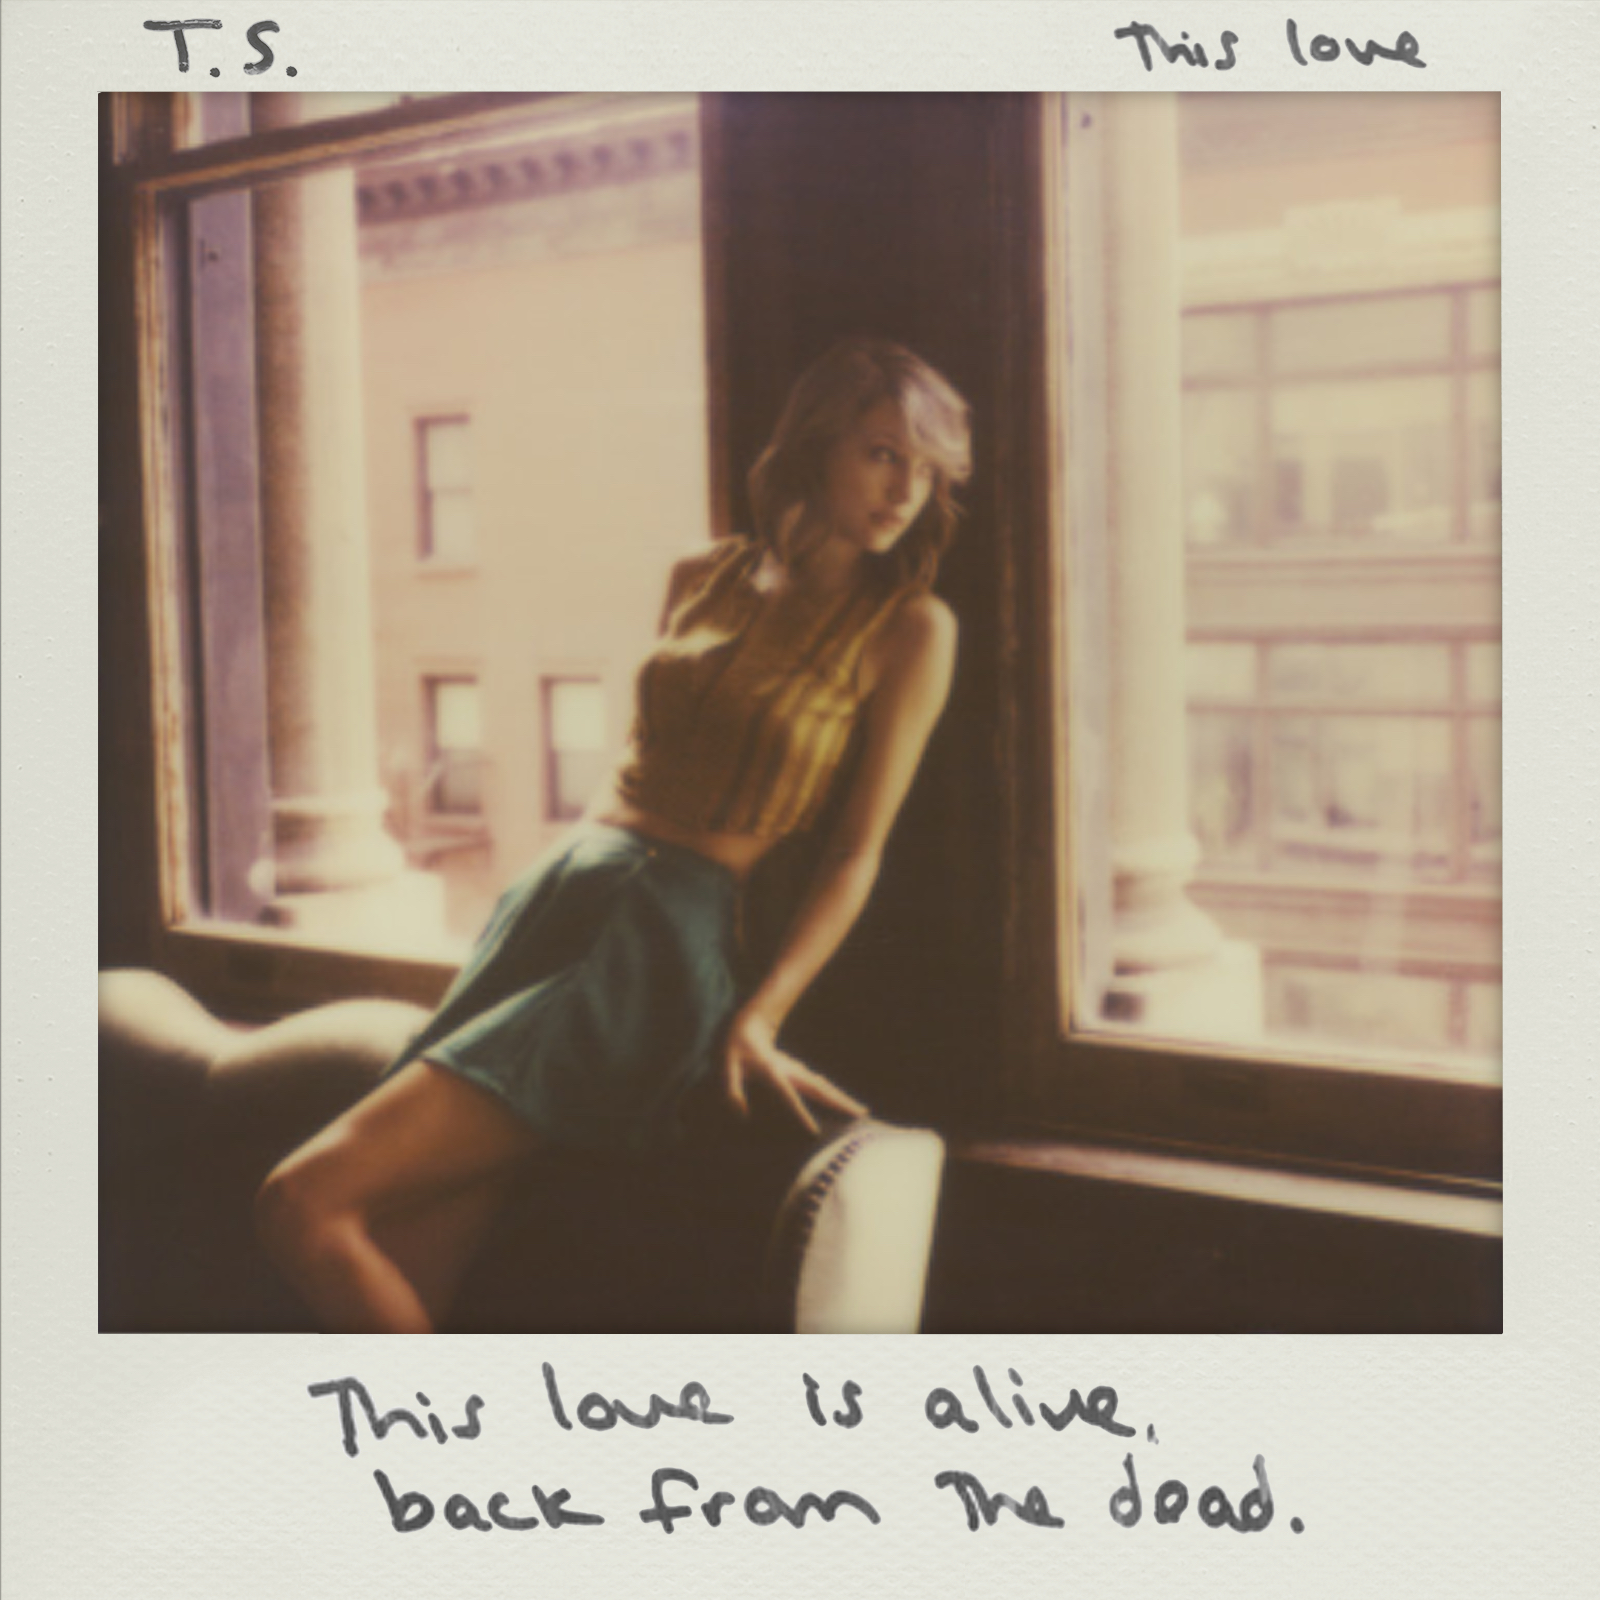 Taylor Swift This Love cover artwork